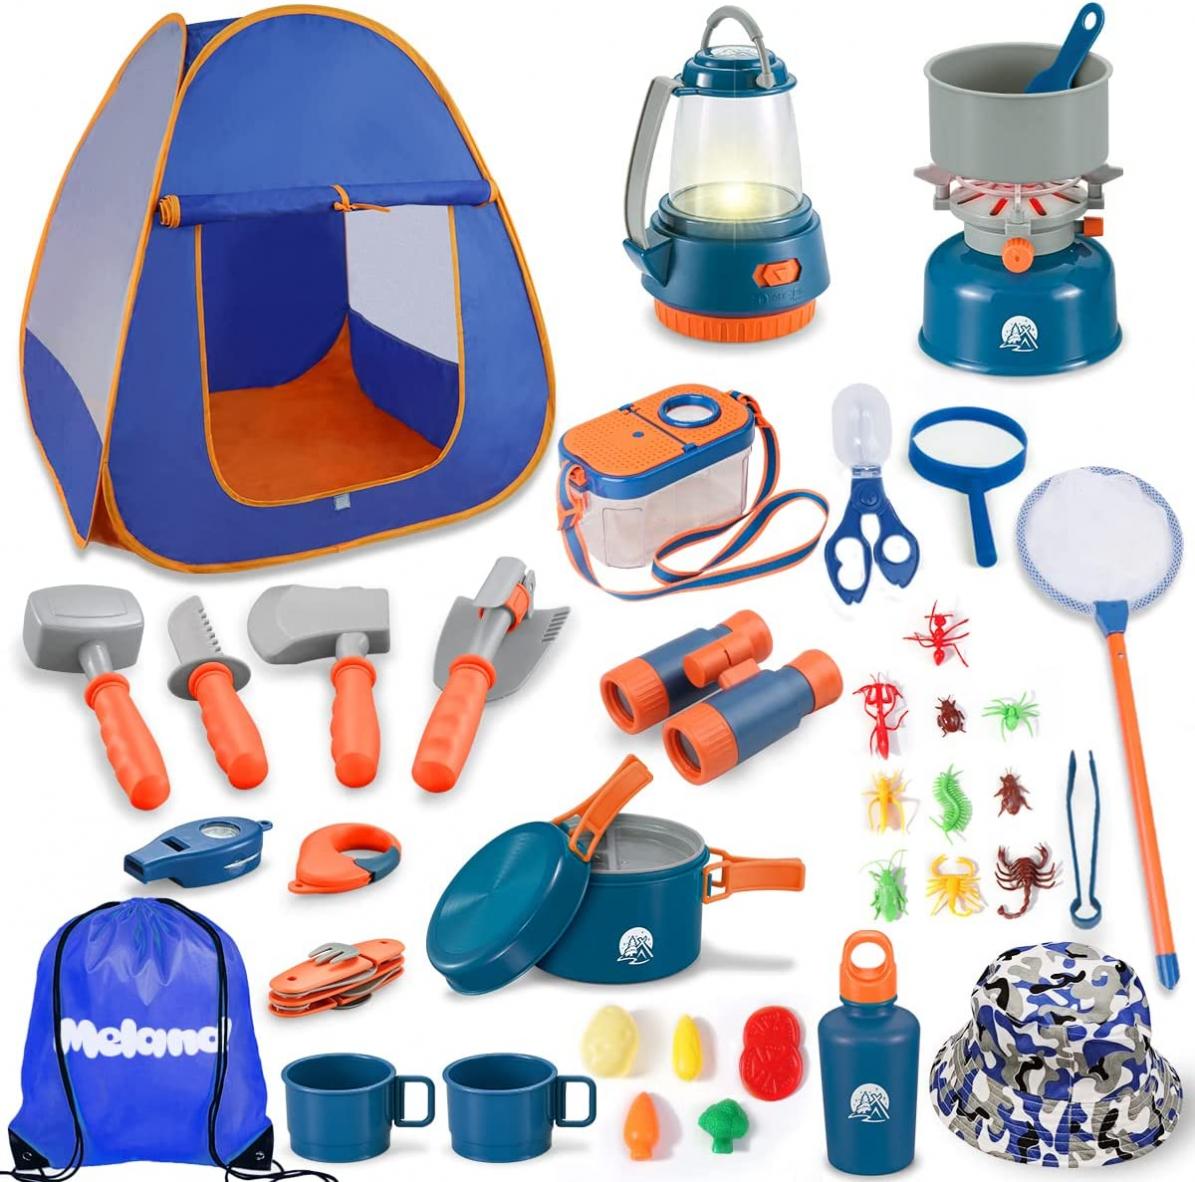 Meland Kids Camping Set with Tent 42pcs - Camping Gear Toy with Pretend Play Tent Outdoor Toy for Toddlers Birthday Gift